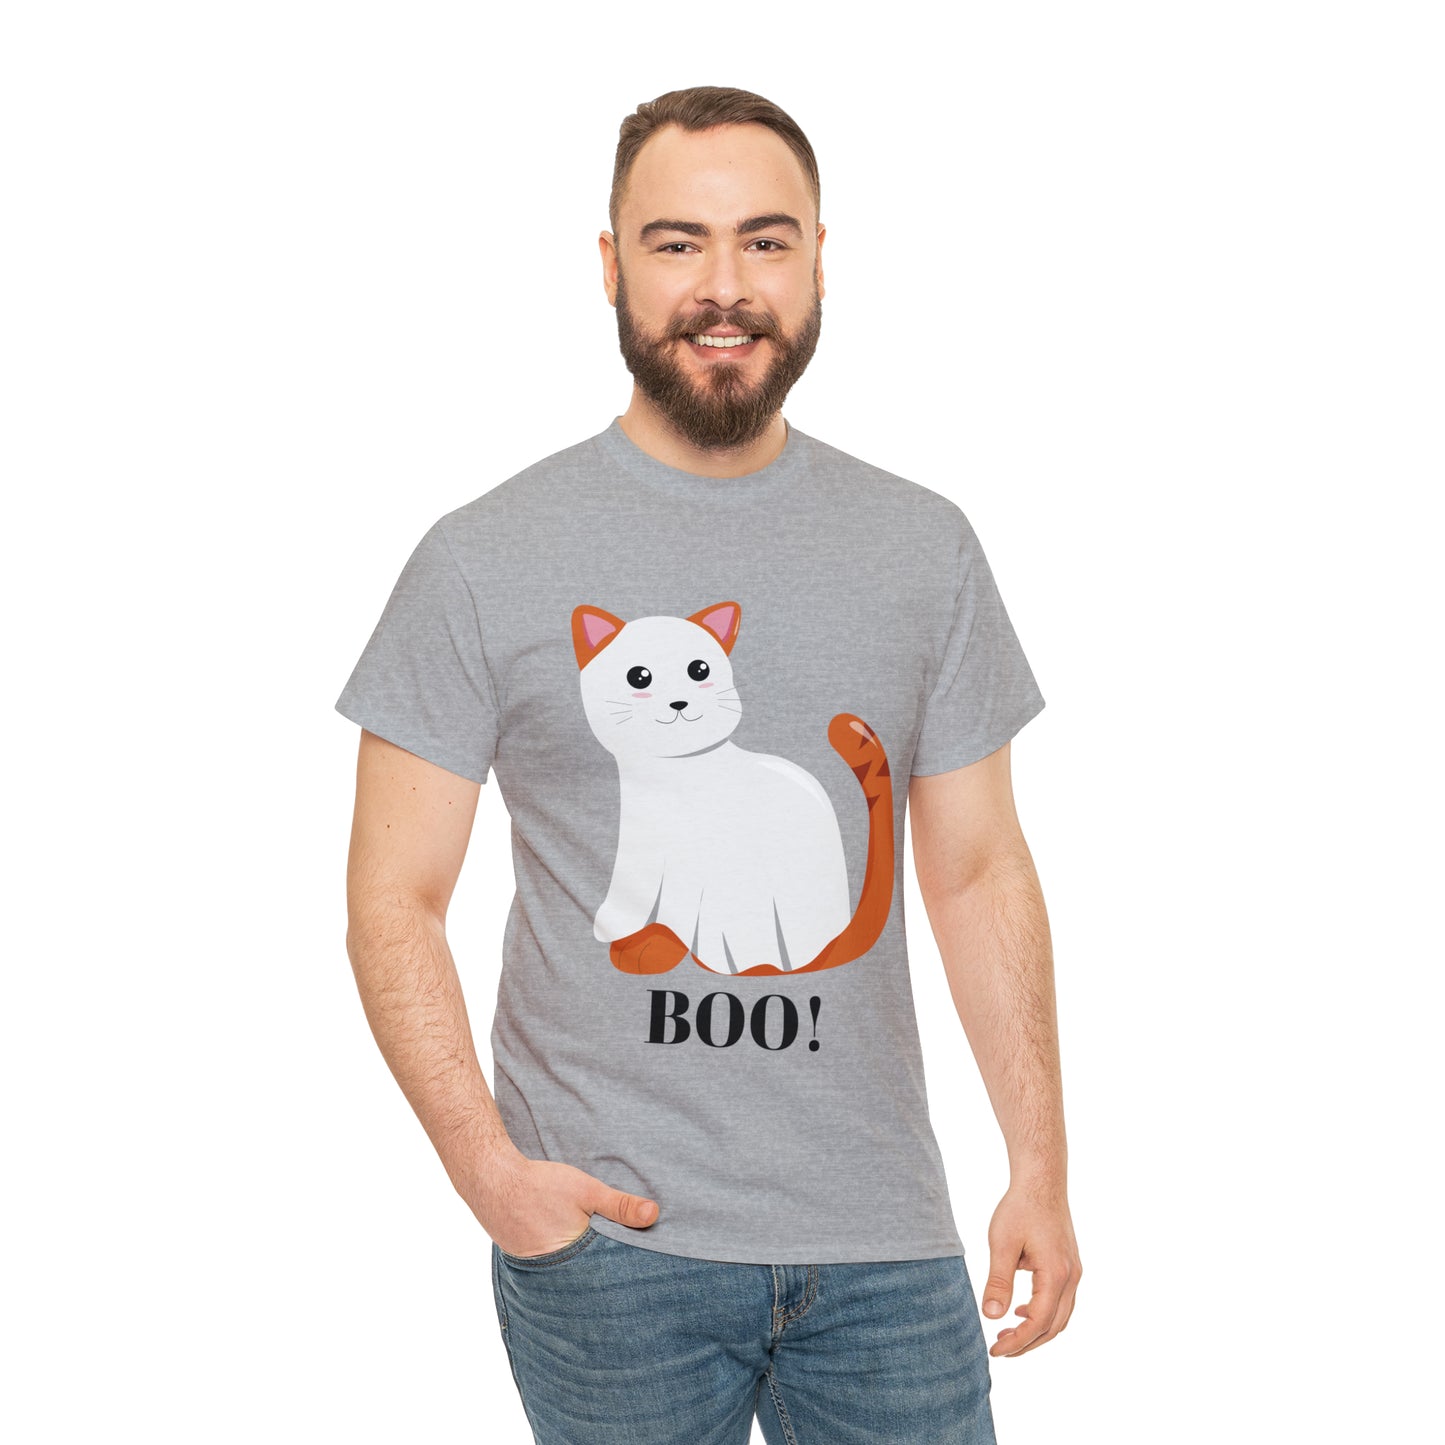 Ghost Cat Shirt, Funny Halloween Cat Ghost Boo Shirt, Horror Shirt, Halloween Shirt